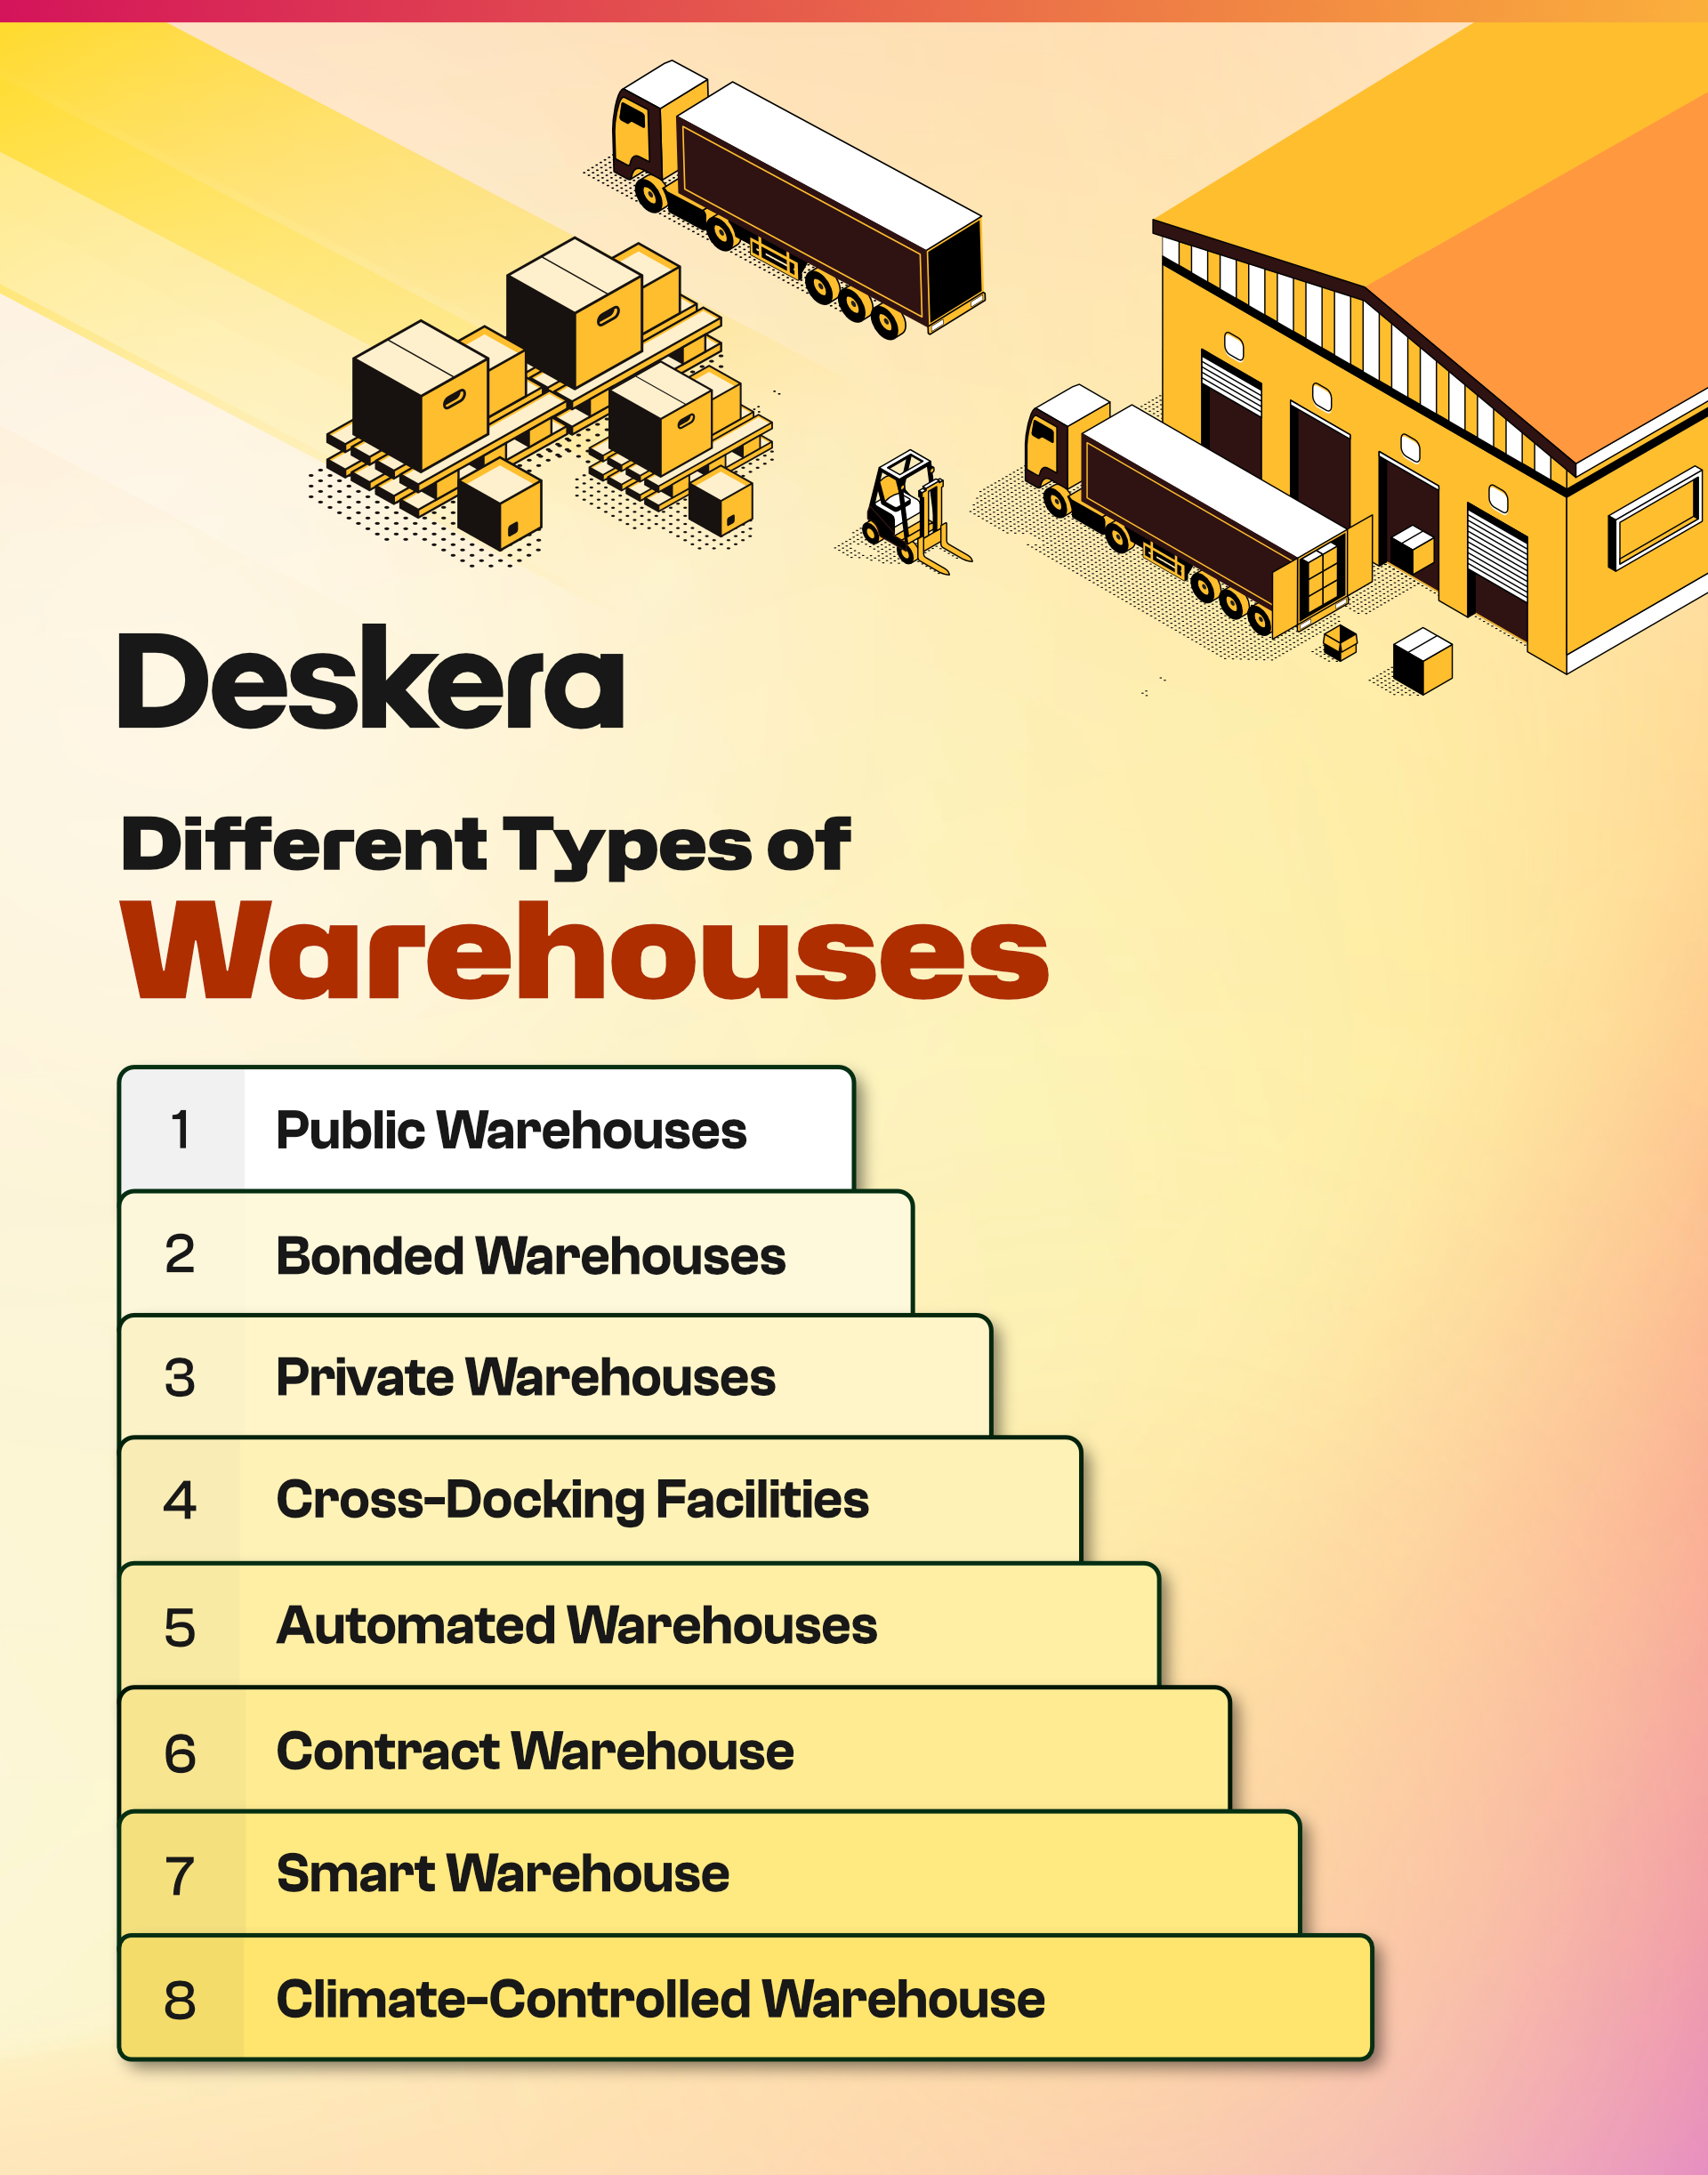 There are 8 different types of warehouses like public warehouses, bonded warehouses, smart warehouses, etc.